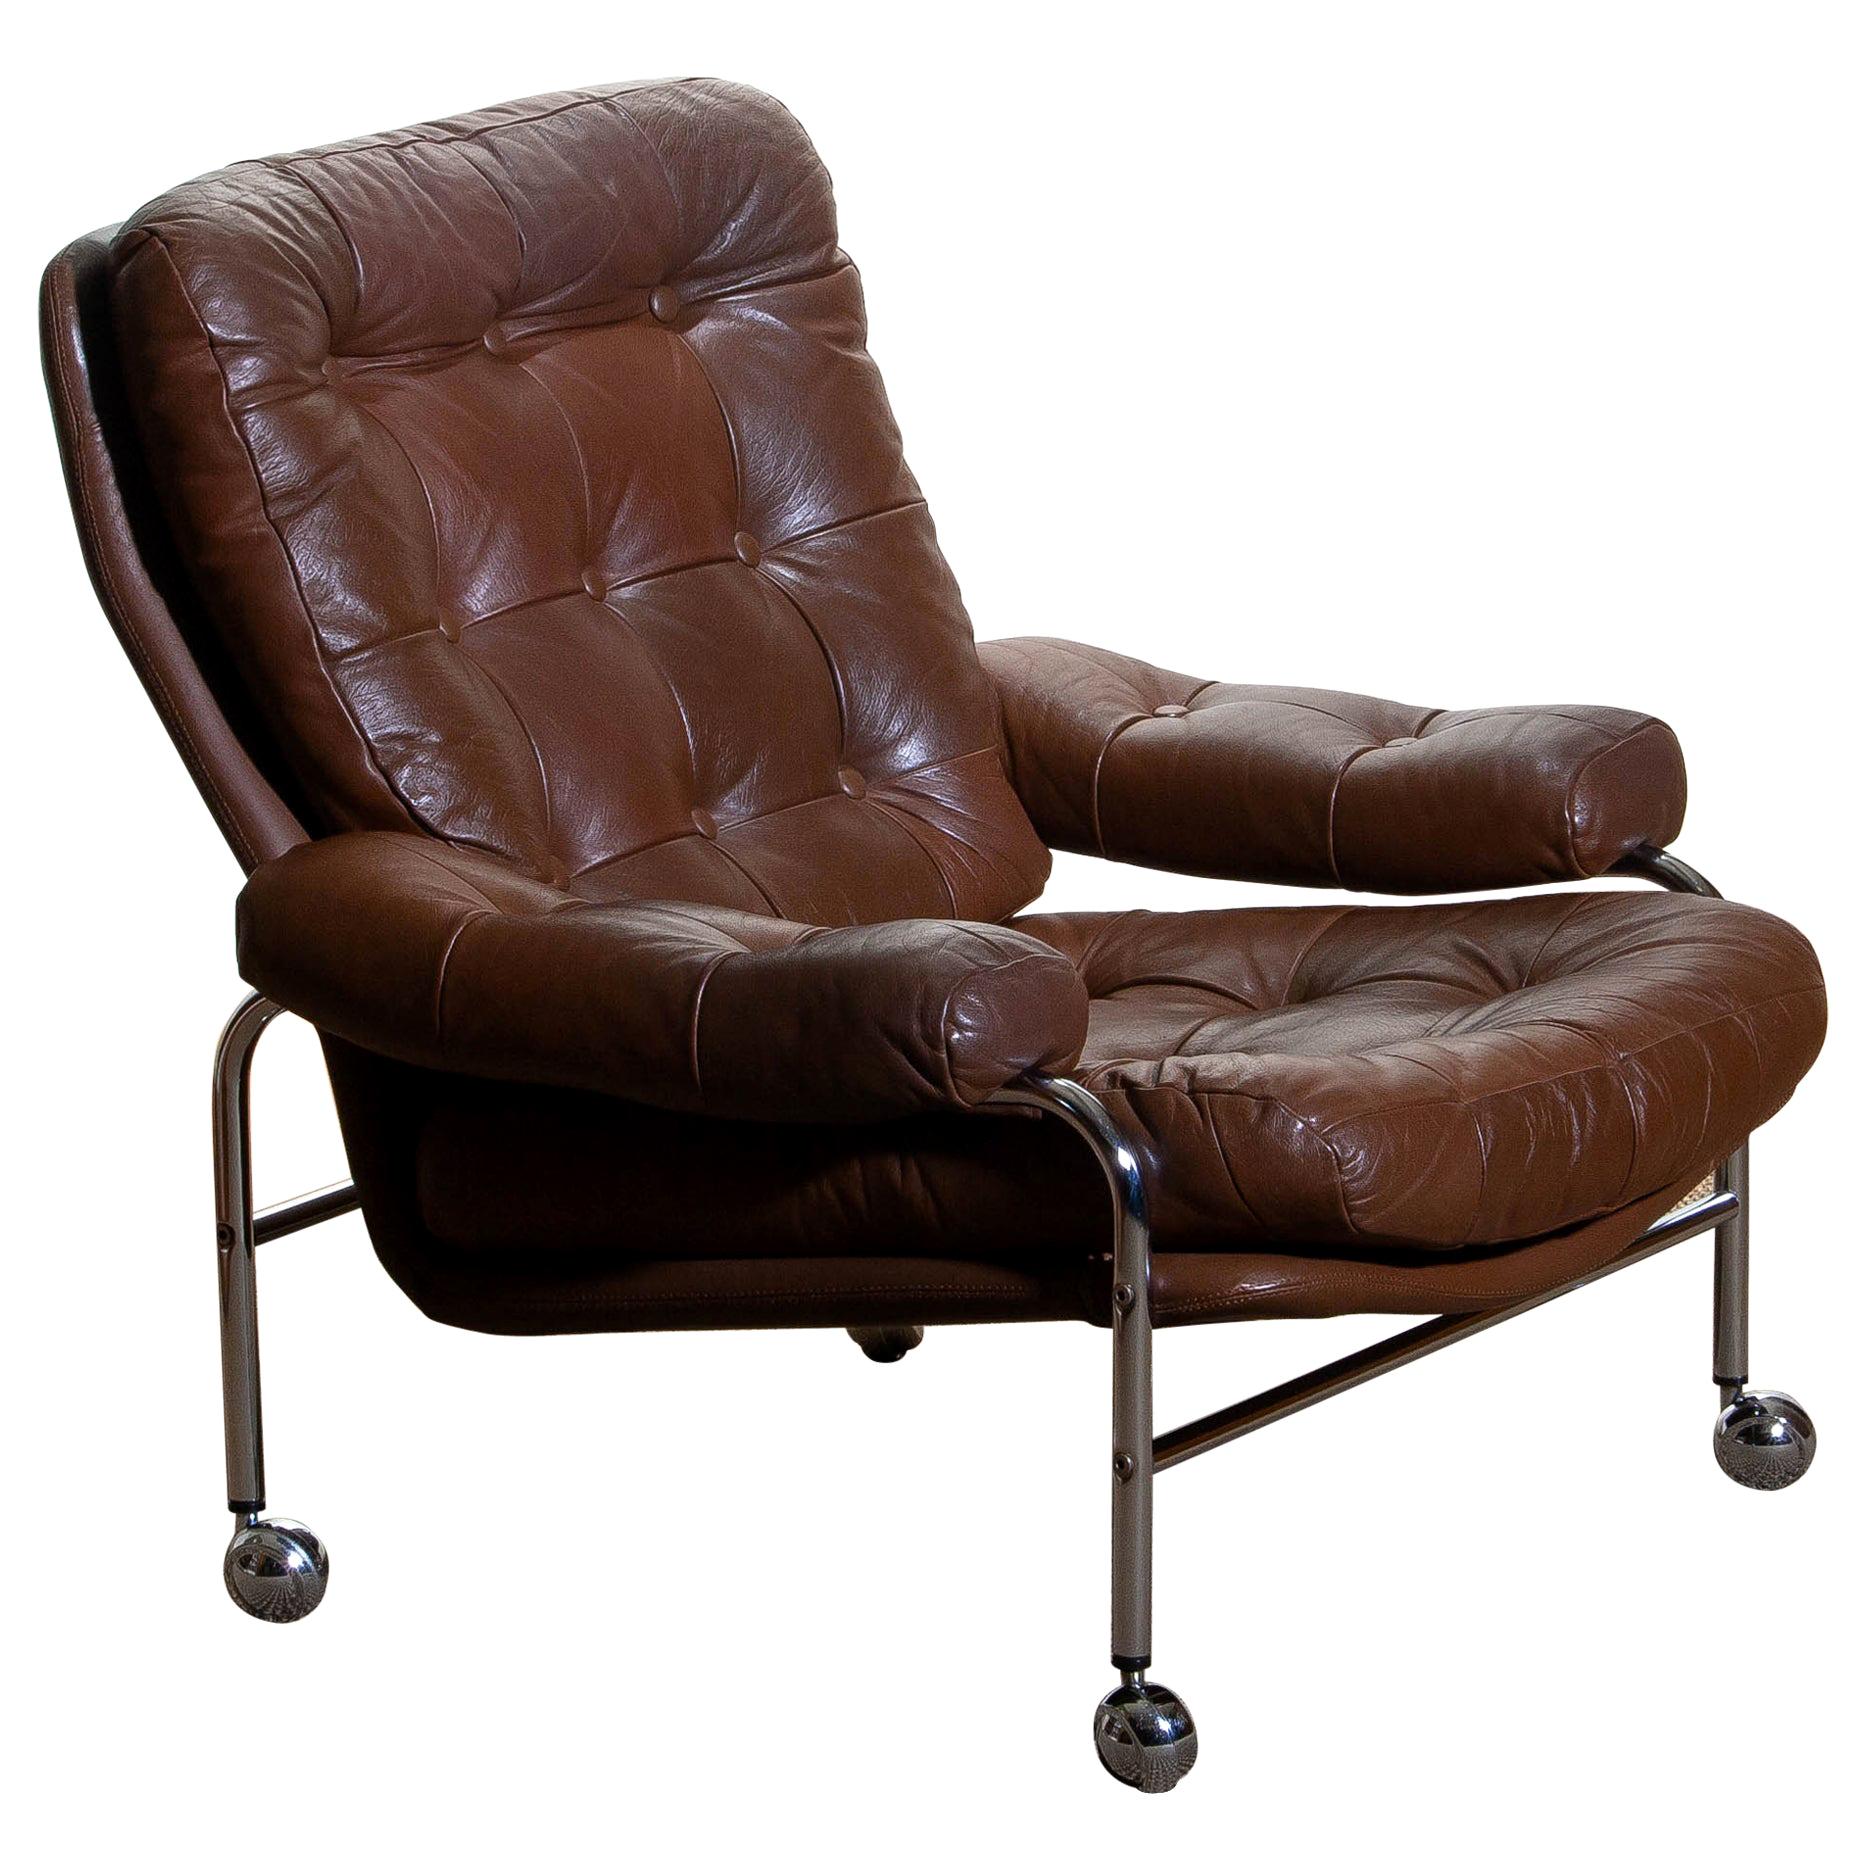 Extremely comfortable easy or lounge chair made by Scapa Rydaholm, Sweden.
This, typical Scandinavian chair is upholstered with brown leather based on a chromed metal frame.
All in perfect condition.
Note: We have two chairs on stock!
       